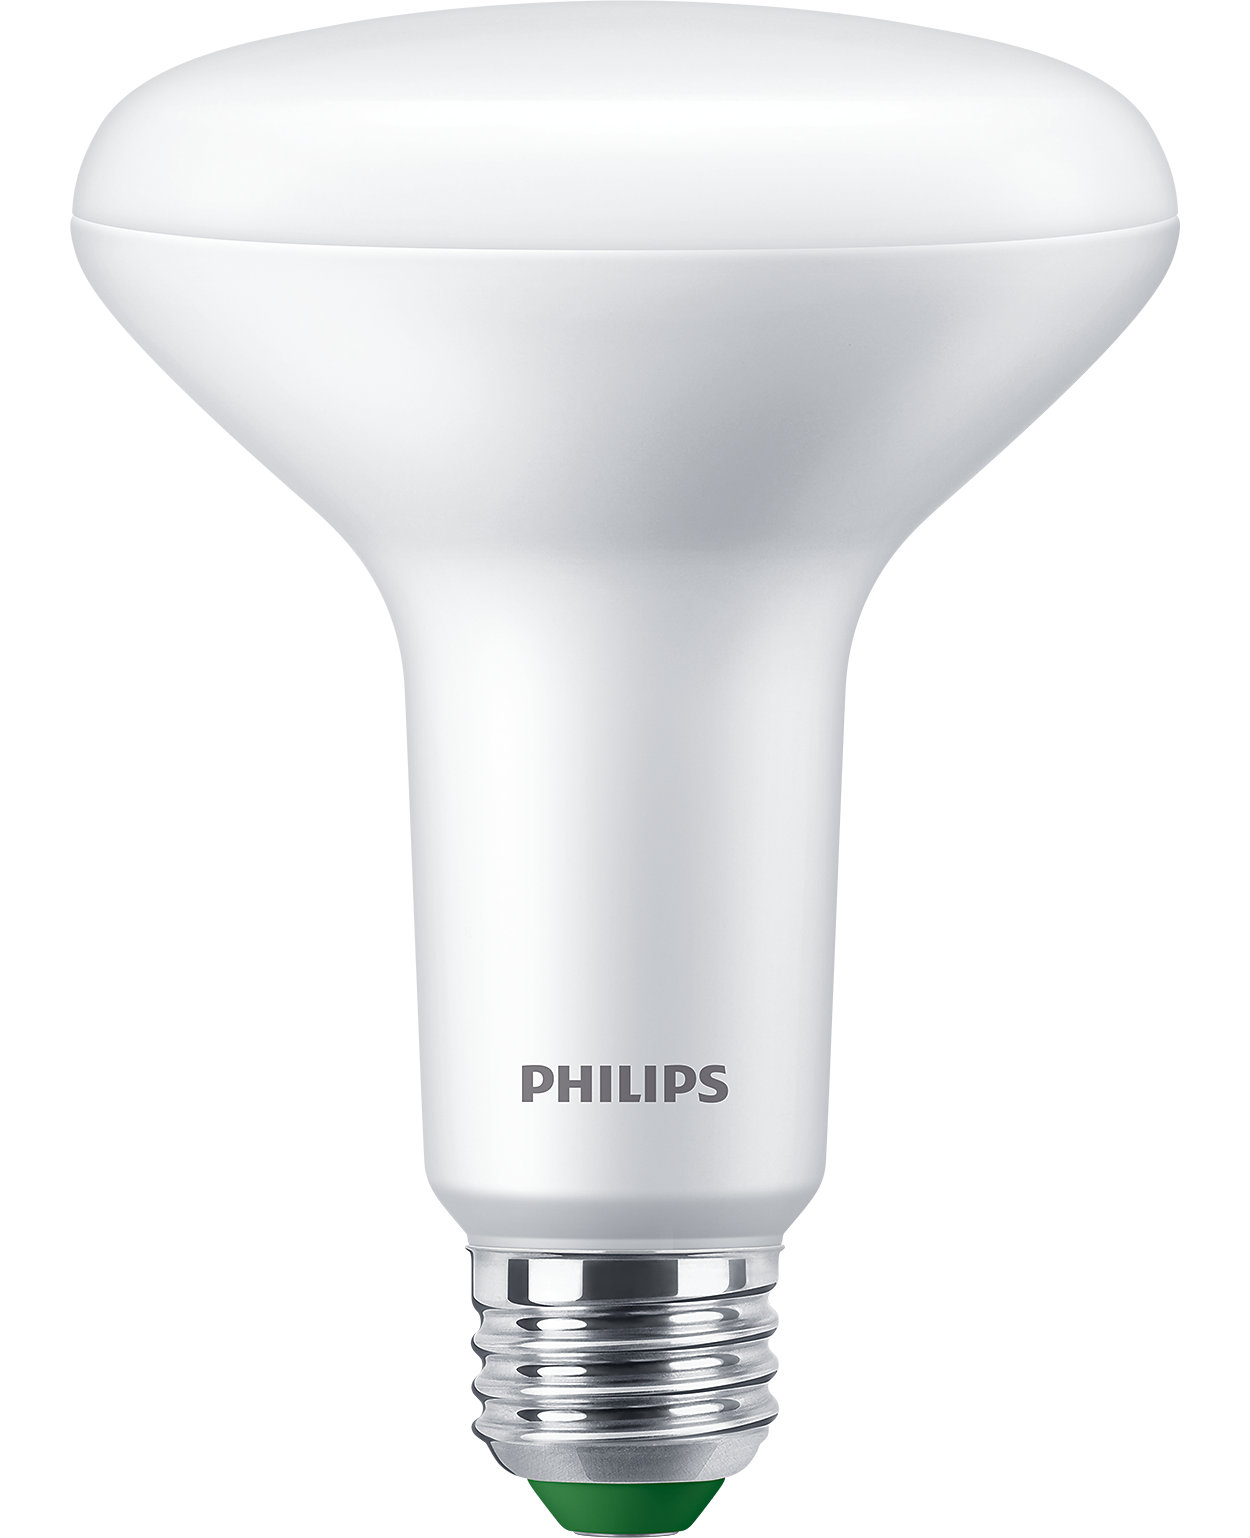 UltraEfficient lamp, provide most sustainable and energy saving solution for you